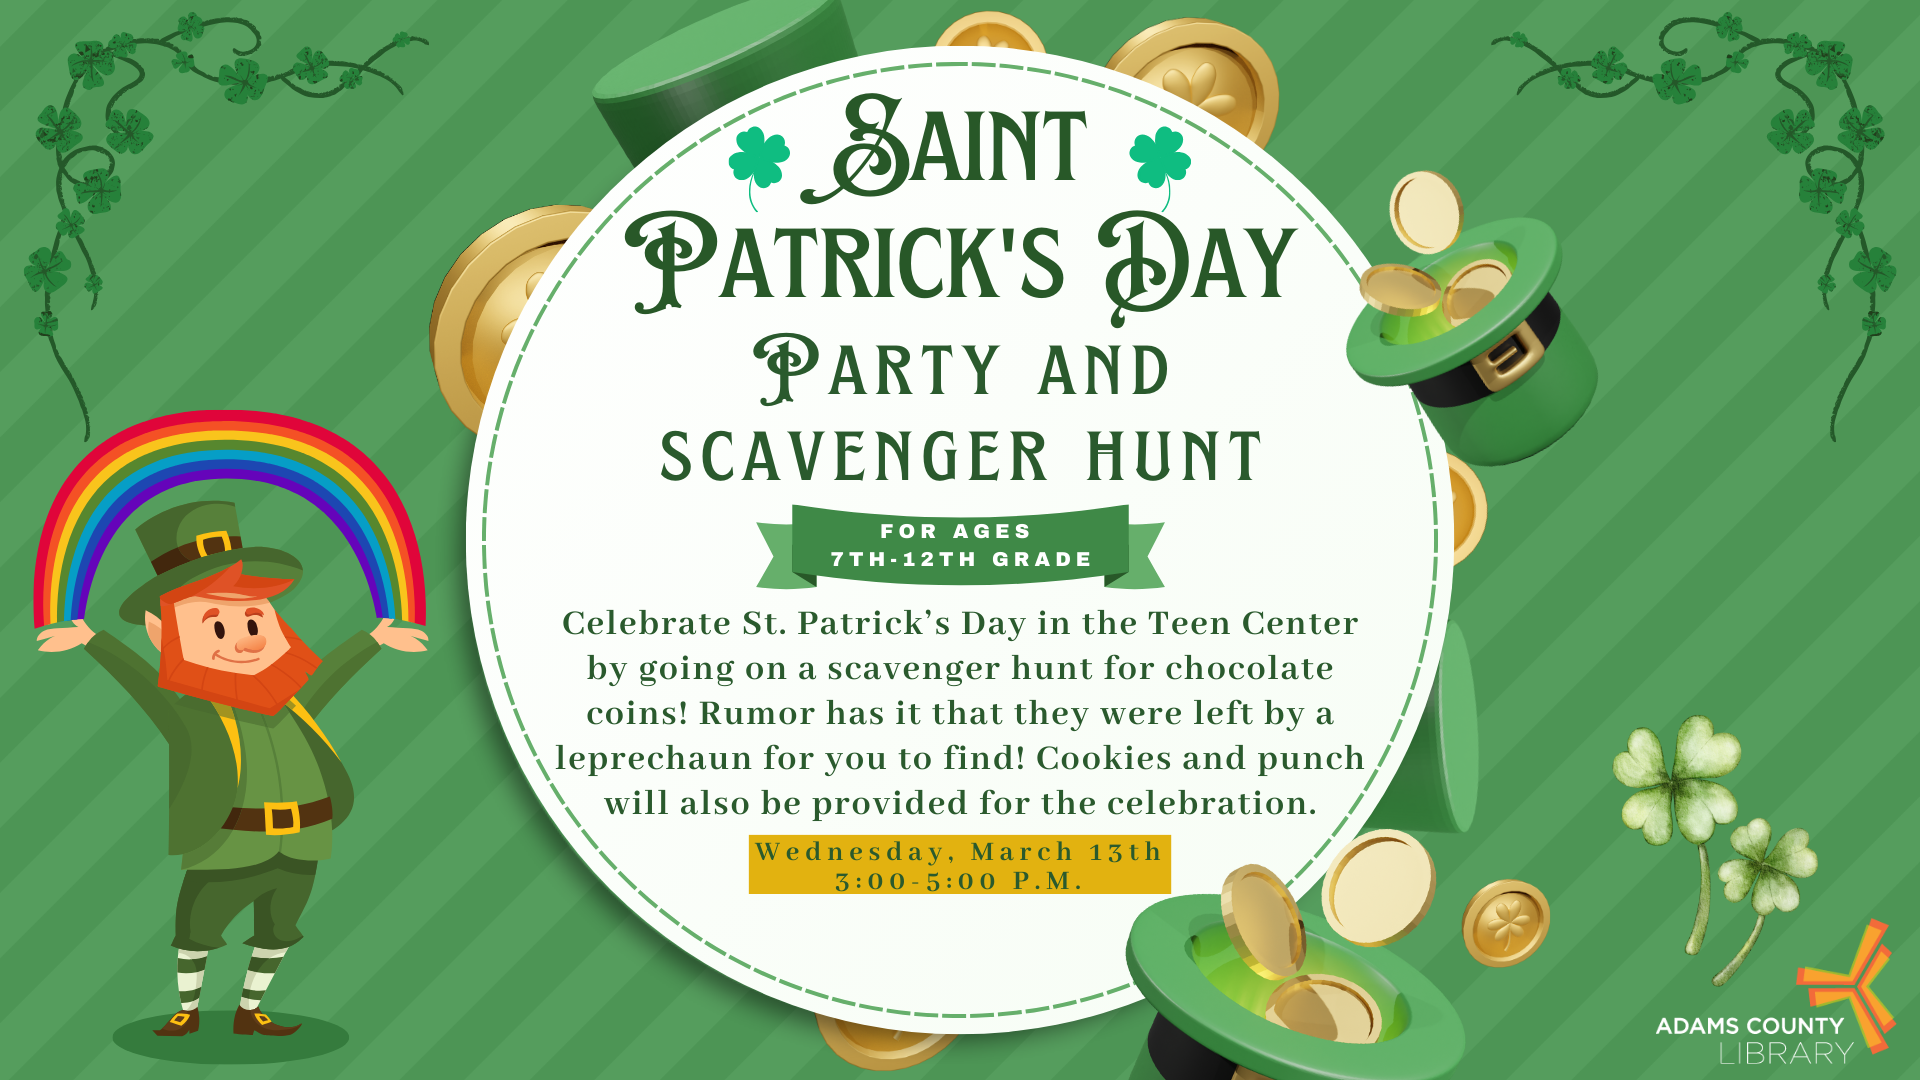 St. Patrick’s Day Party and Scavenger Hunt